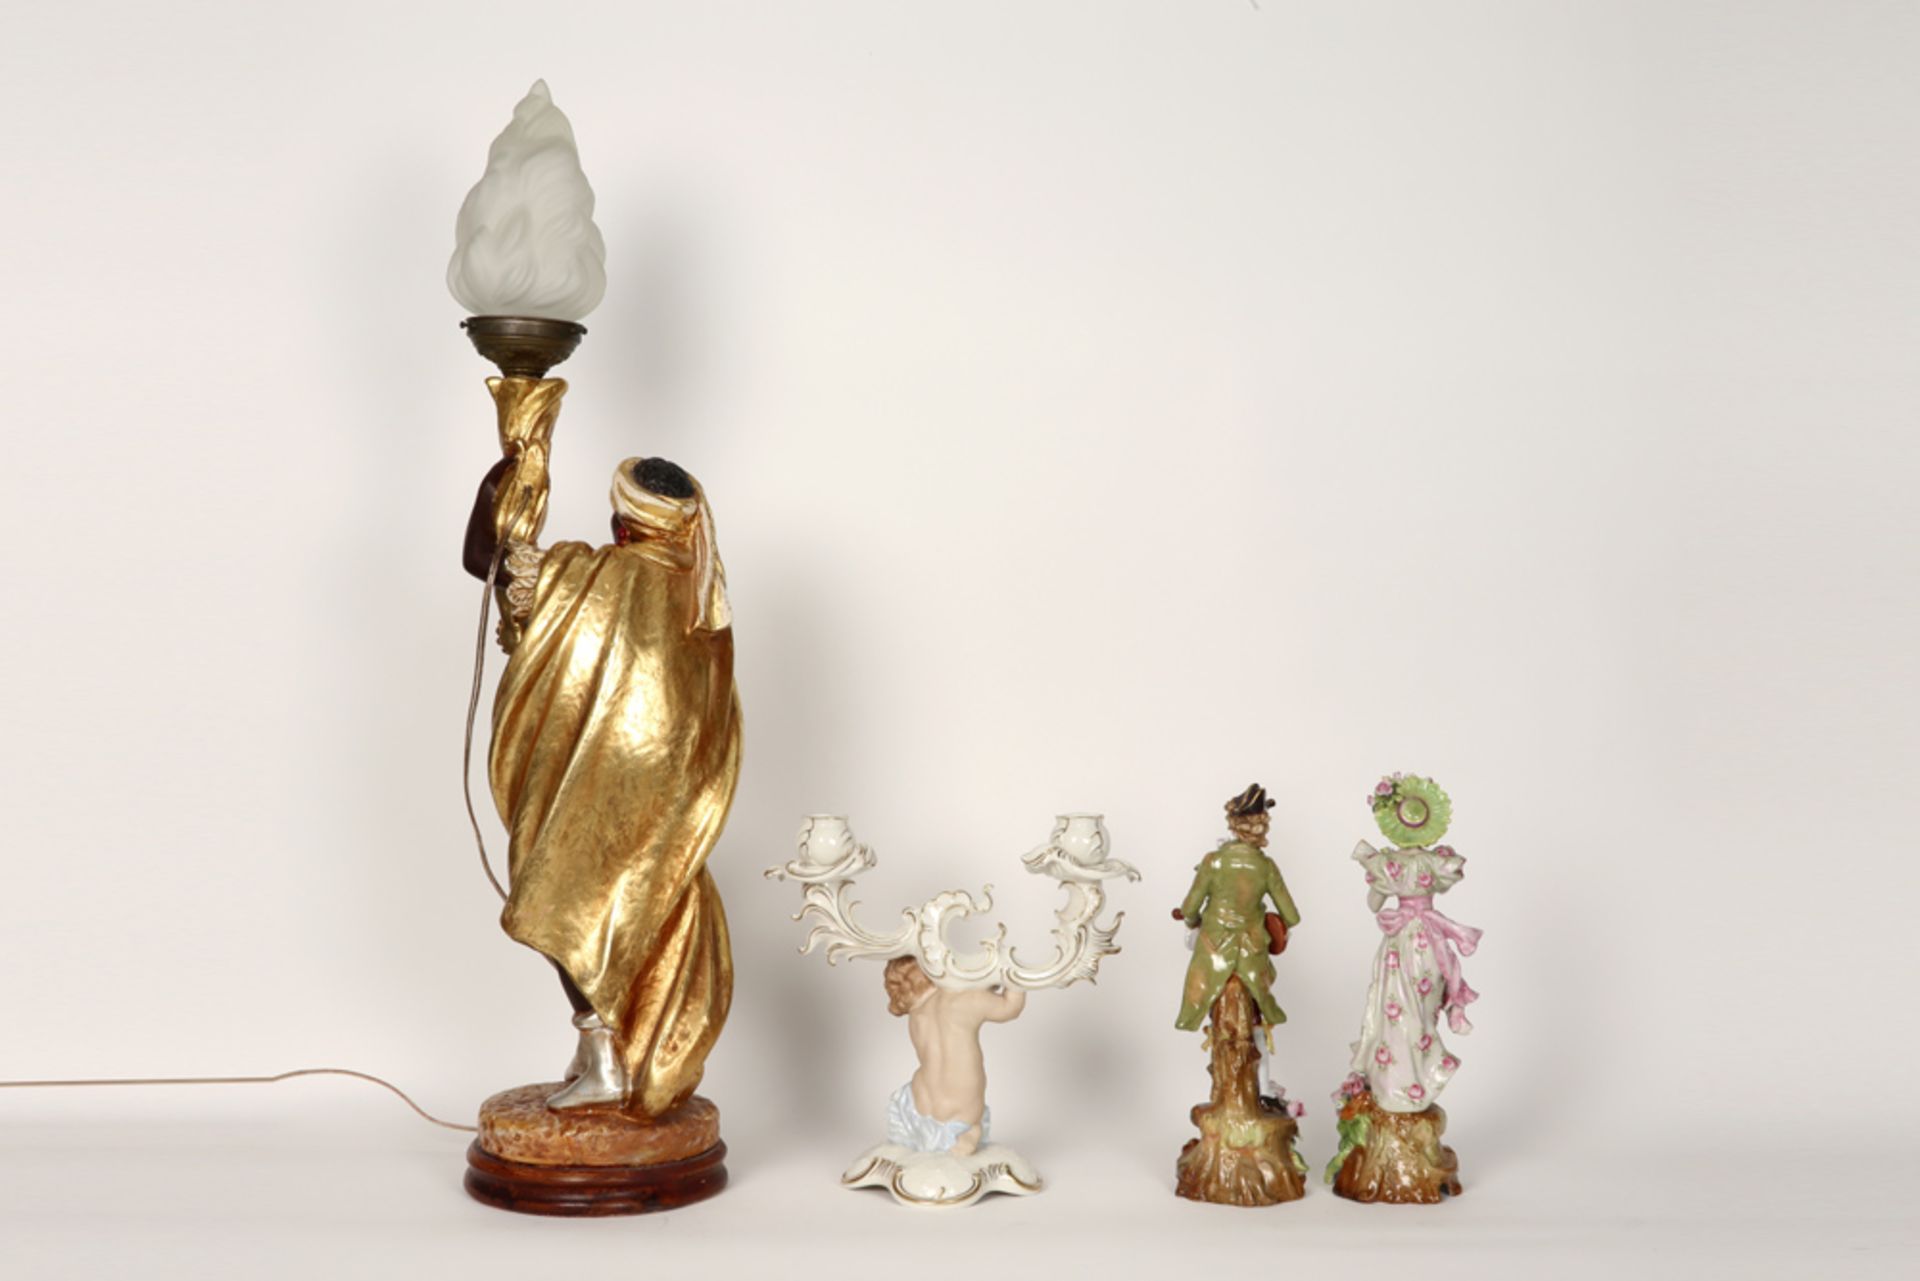 various lot with two figures and a candelabra in porcelain & with a "Venetian Moor" - lamp || Lot - Image 2 of 4